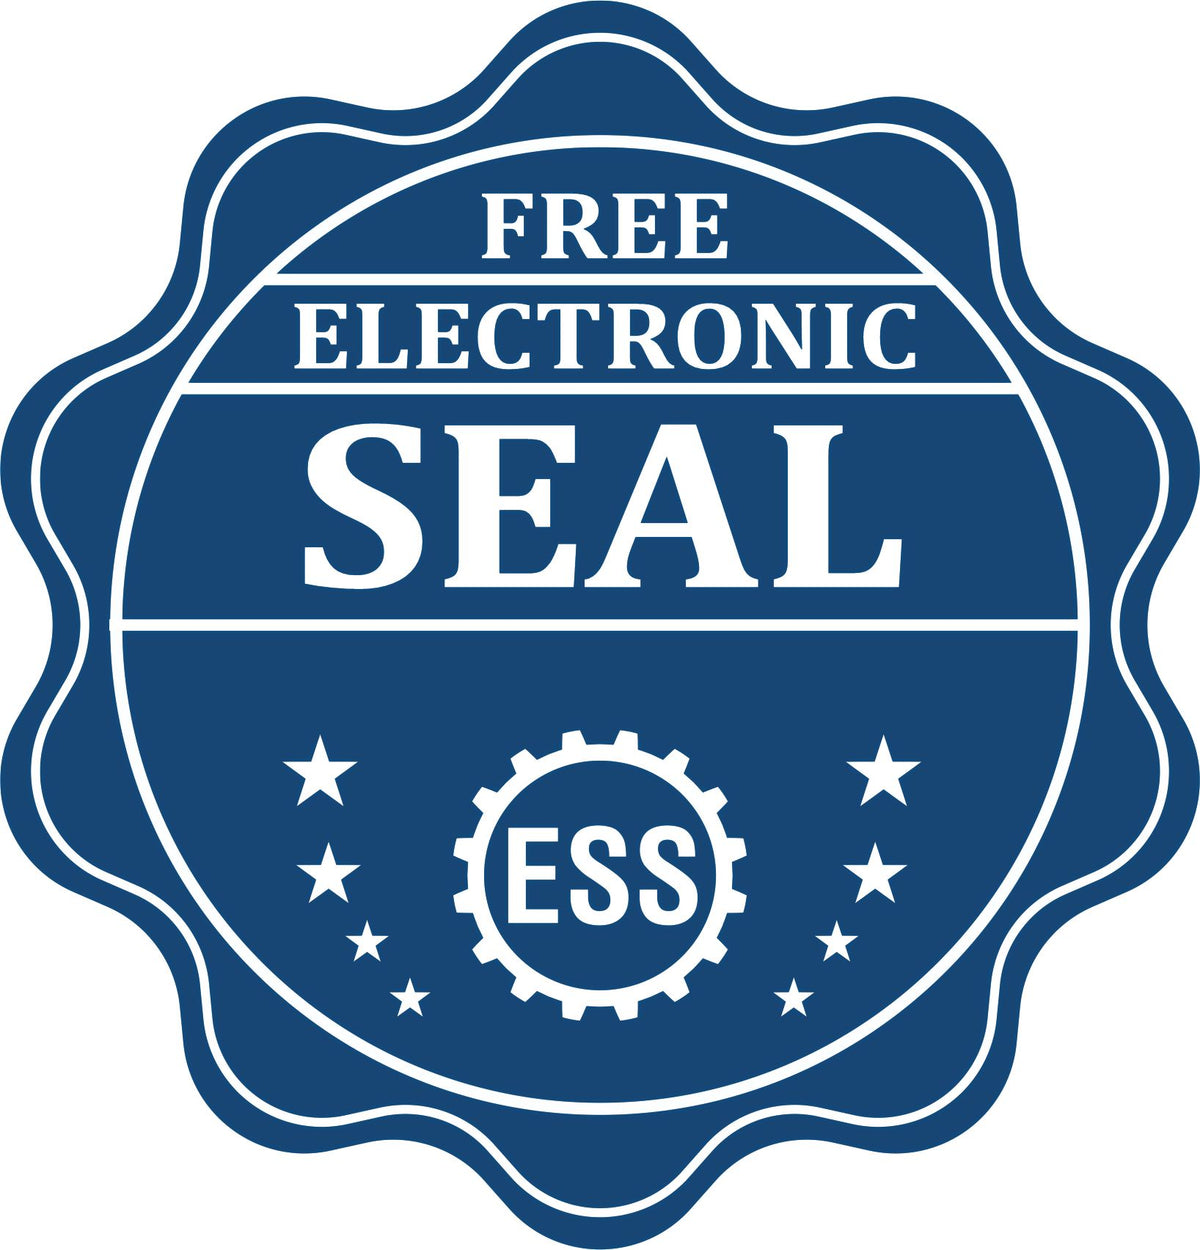 A badge showing a free electronic seal for the State of West Virginia Extended Long Reach Geologist Seal with stars and the ESS gear on the emblem.